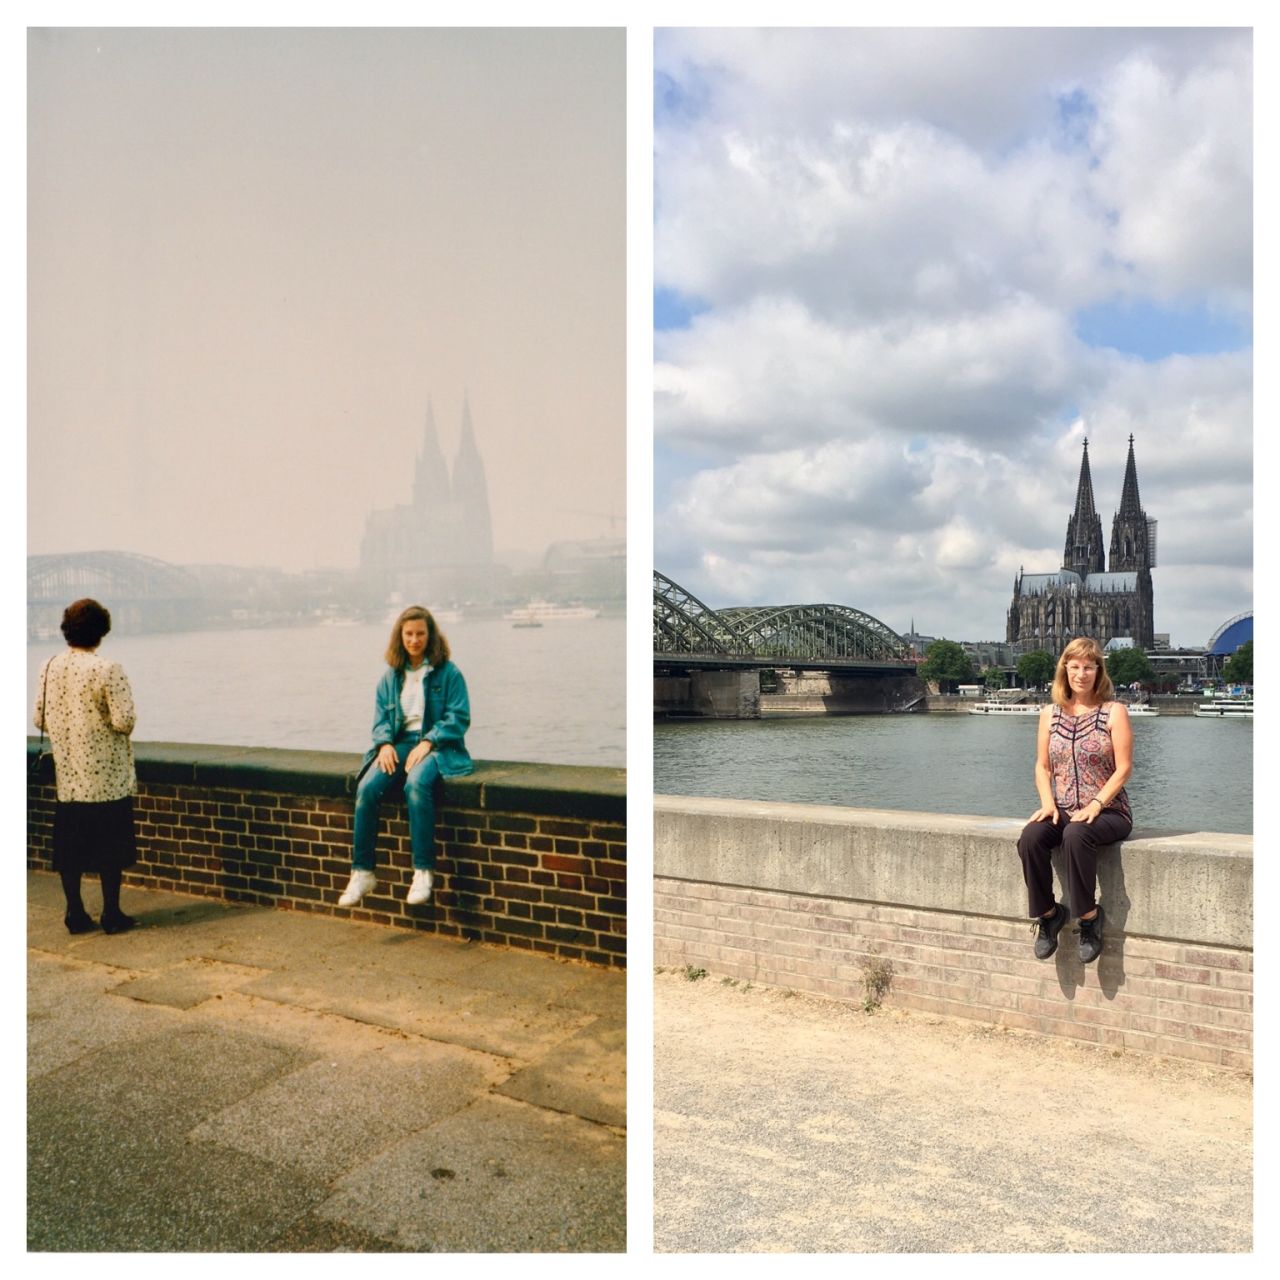 <strong>Europe revisited: </strong>American photographer Lisa Werner recently documented her return to Europe, 30 years after she studied abroad in the 1980s. Werner recreated several photographs from her original trip, including this image of Cologne.